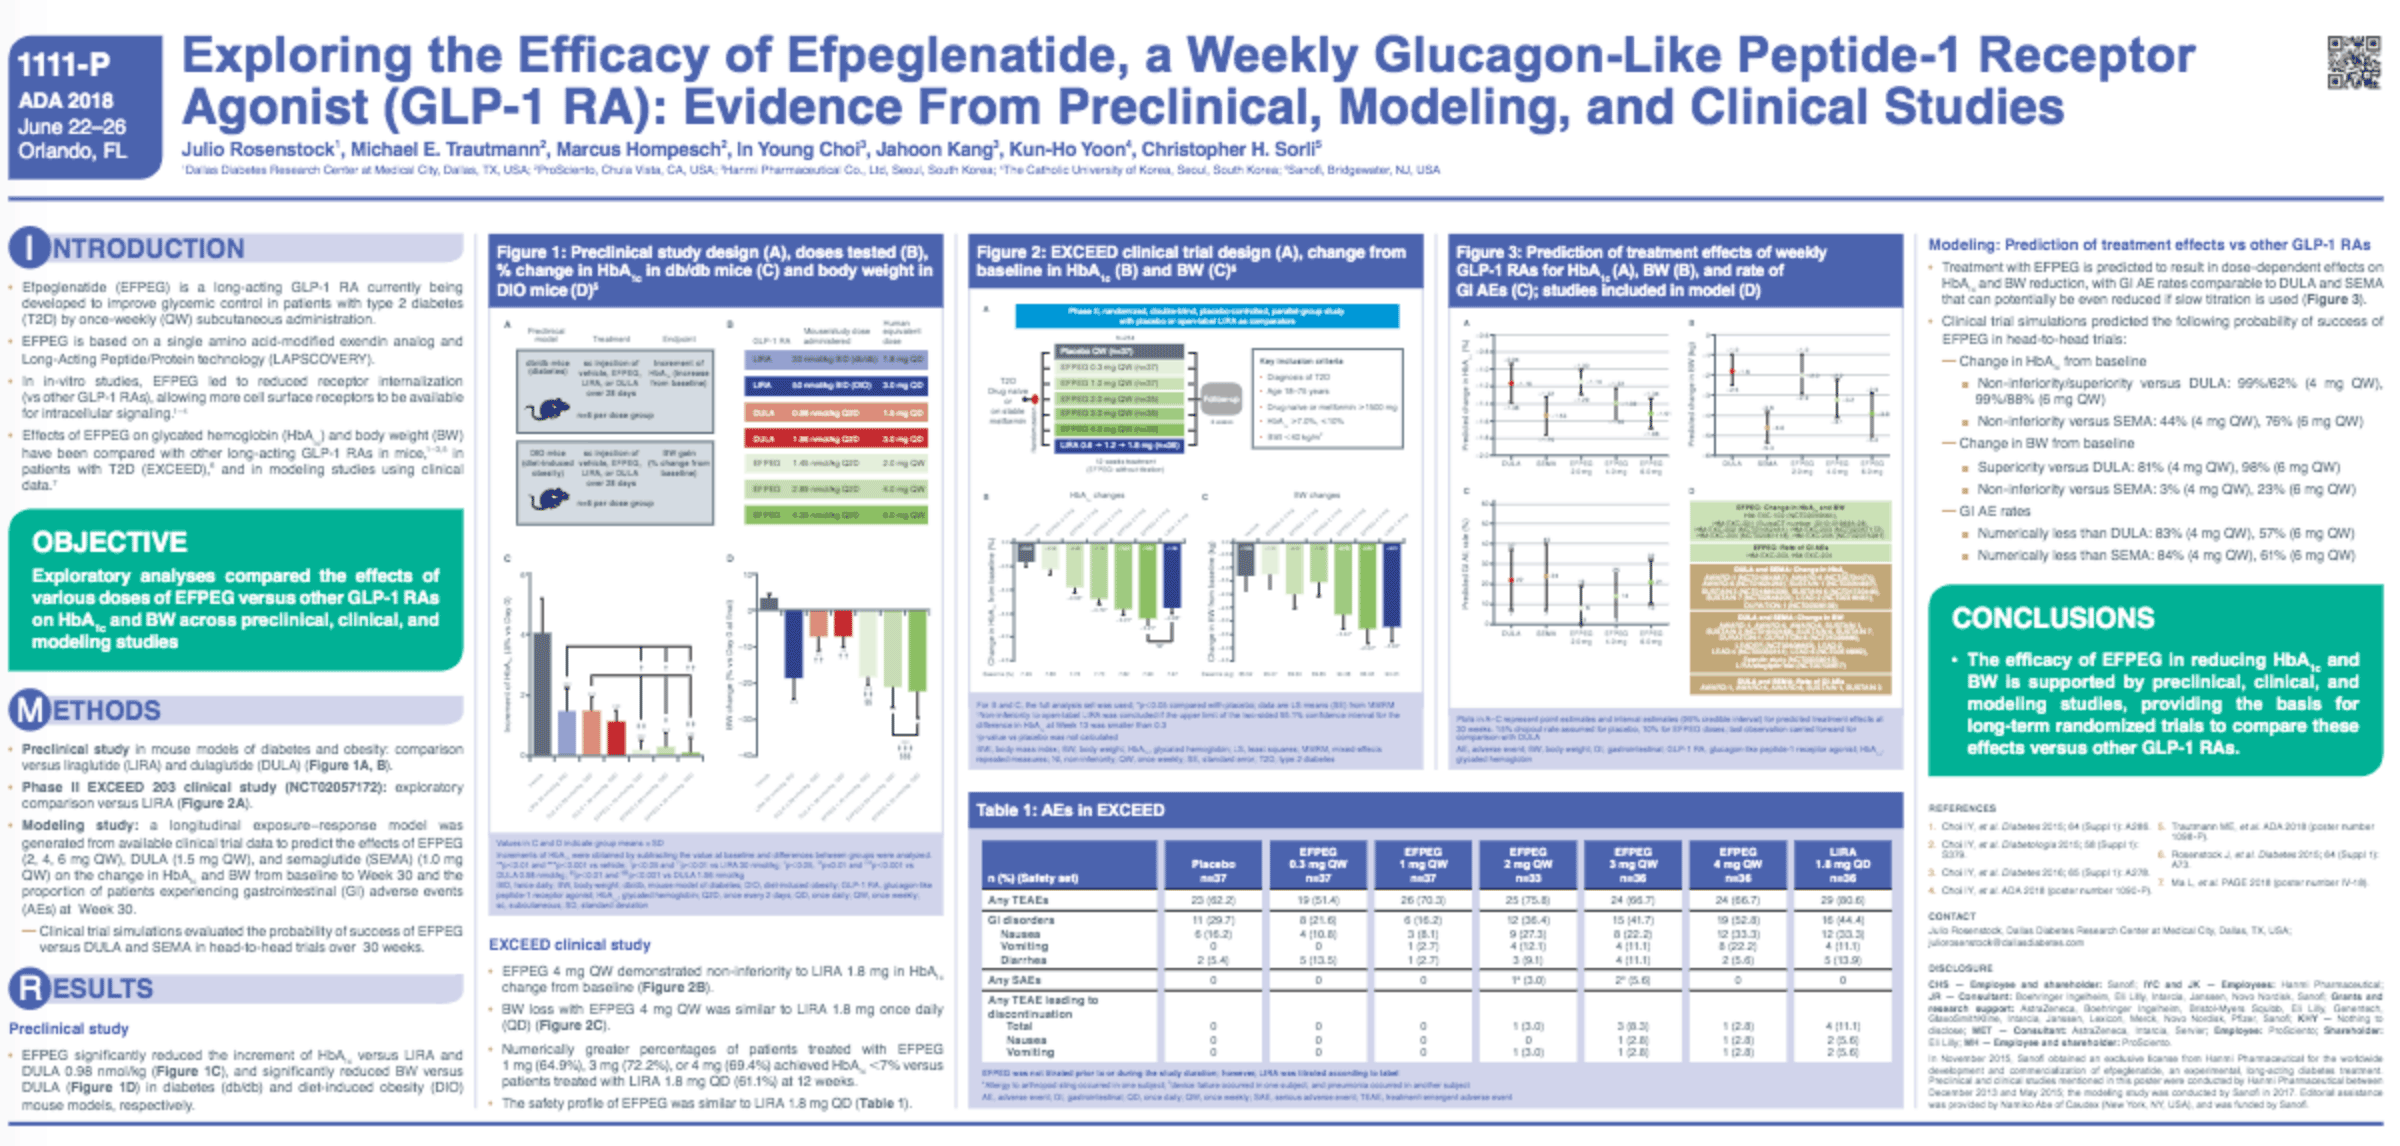 image of Exploring the Efficacy of Efpeglenatide, a Weekly Glucagon-Like Peptide-1 Receptor Agonist (GLP-1RA)—Evidence from Preclinical, Modeling, and Clinical Studies